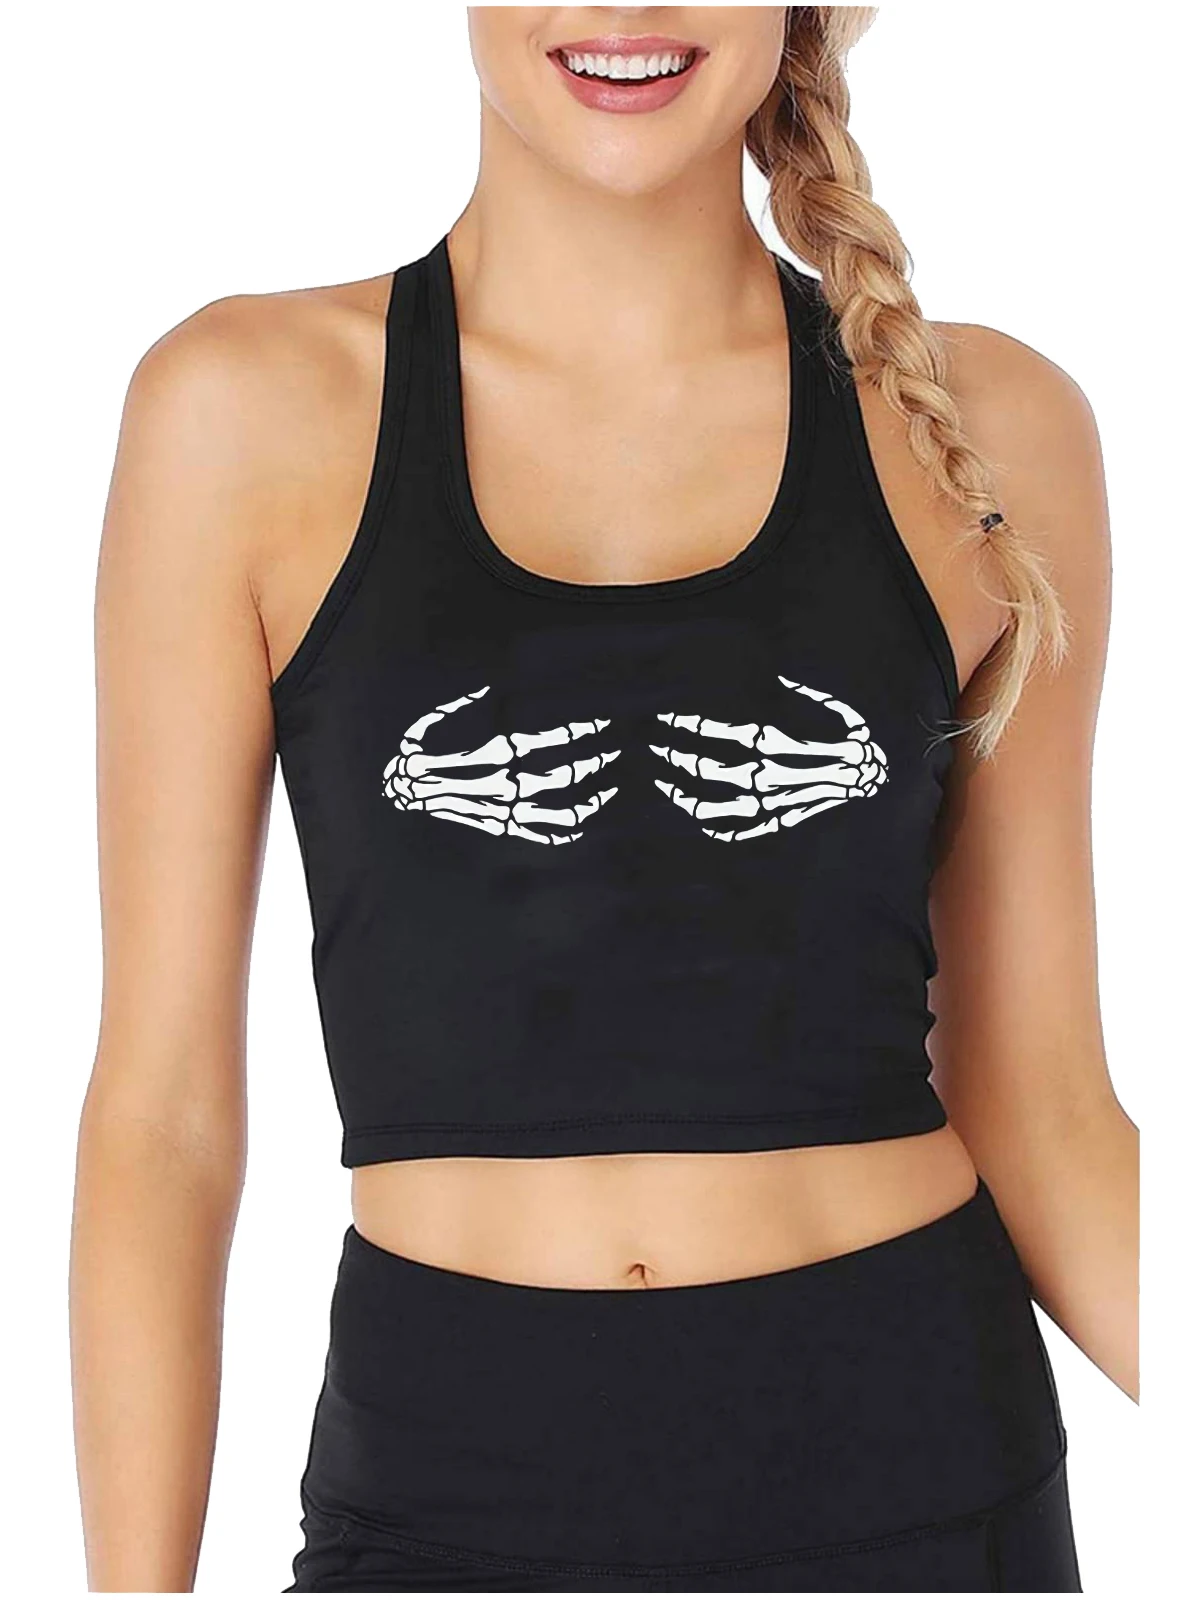 

Halloween Skeleton Hands Boobs Design Sexy Crop Top Funny Creepy Outfit Bones Grunge Alternative Tank Tops Gothic Camisole